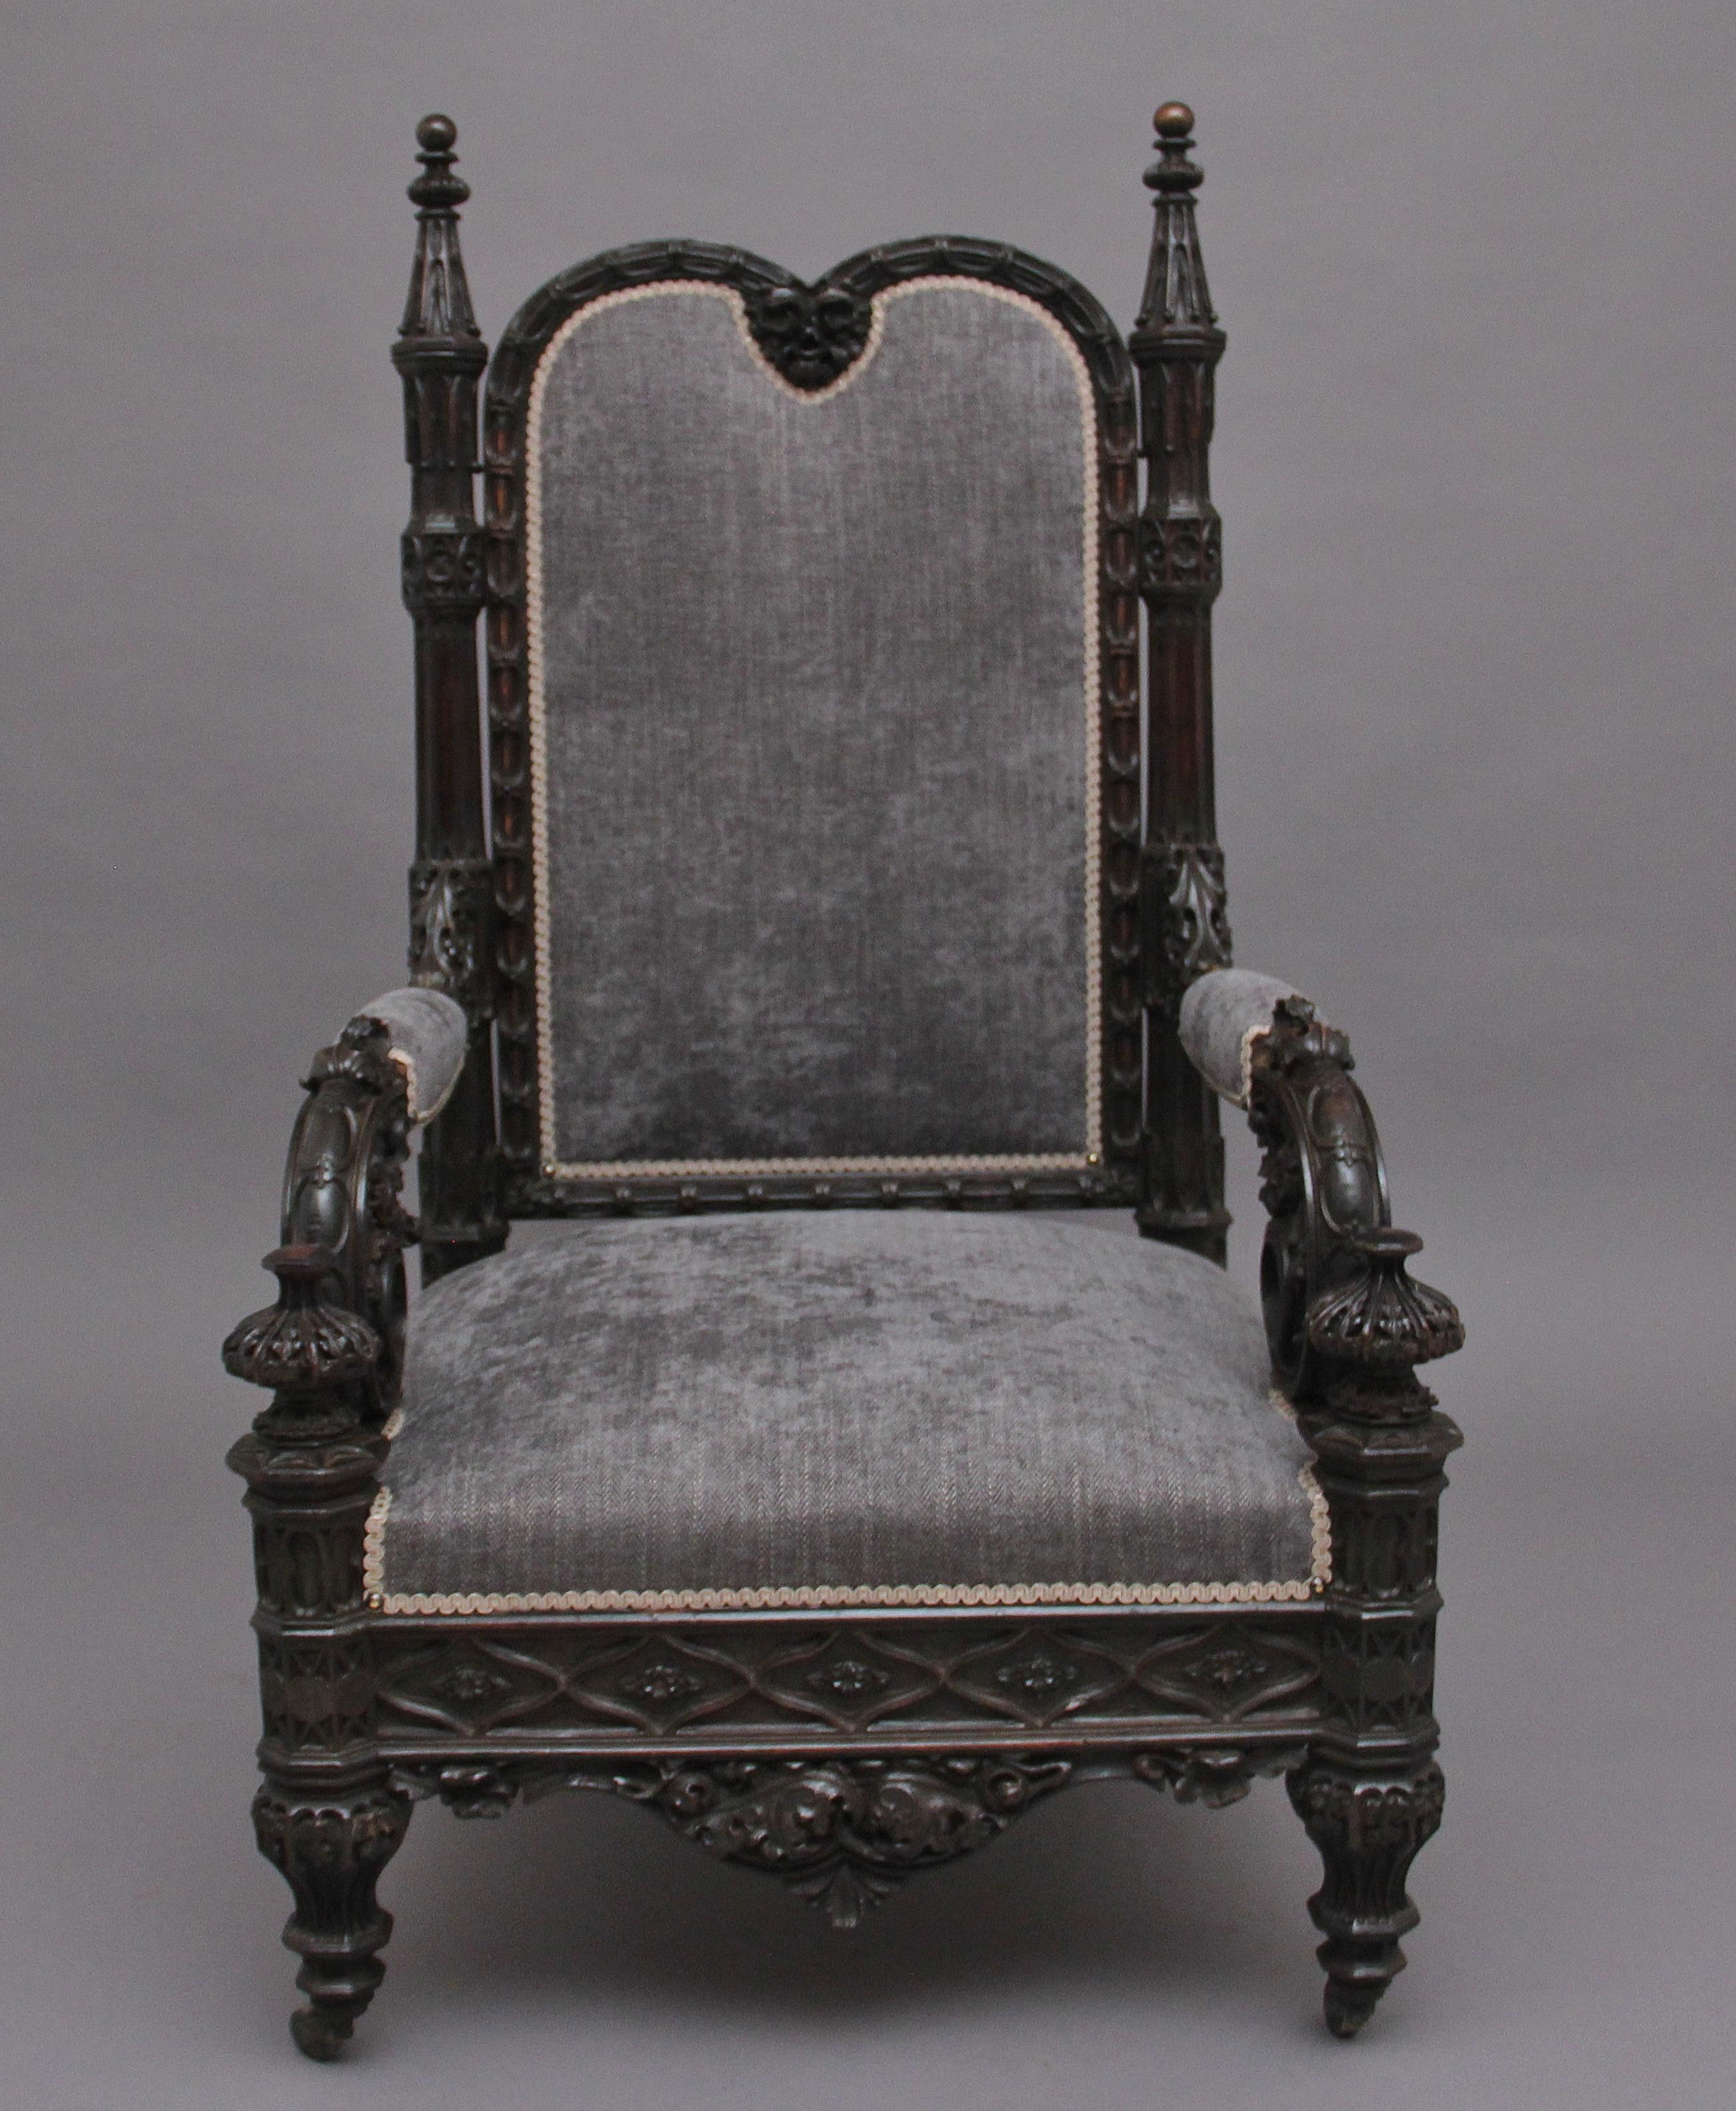 A superb quality 19th century carved Gothic style armchair, recently upholstered in a grey fabric, the arched padded back with decorative carved frame with a figure head at the top, with typical carved Gothic columns either side, padded arms and